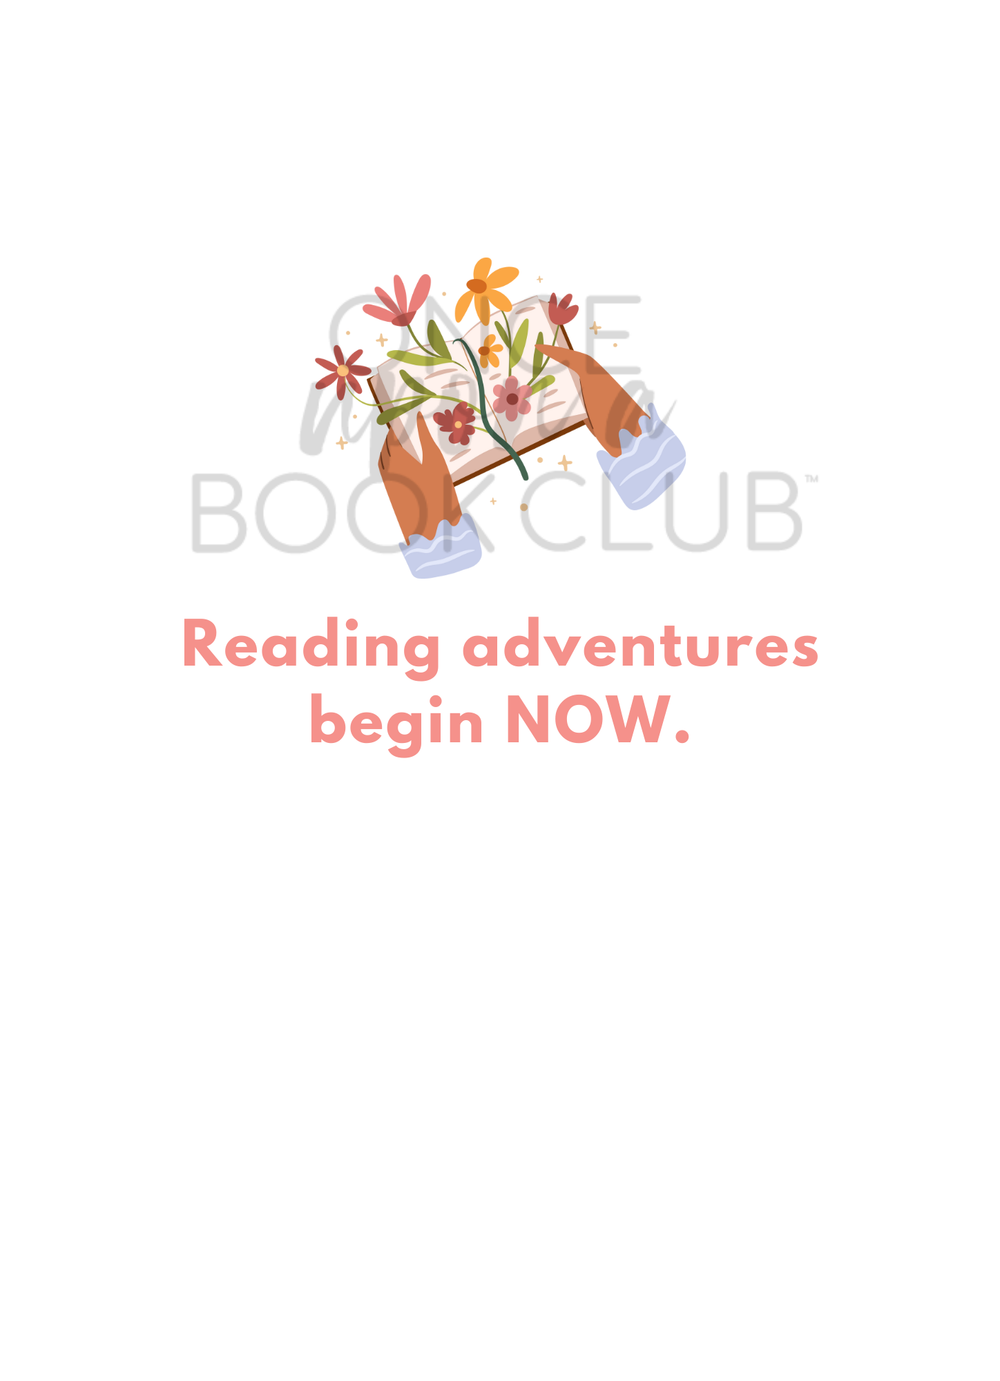 An illustration of a pair of hands holds open a book. Multi-colored flowers emerge from the pages. Under the hands are the words "Reading adventures begin NOW." in light pink. On a white background.